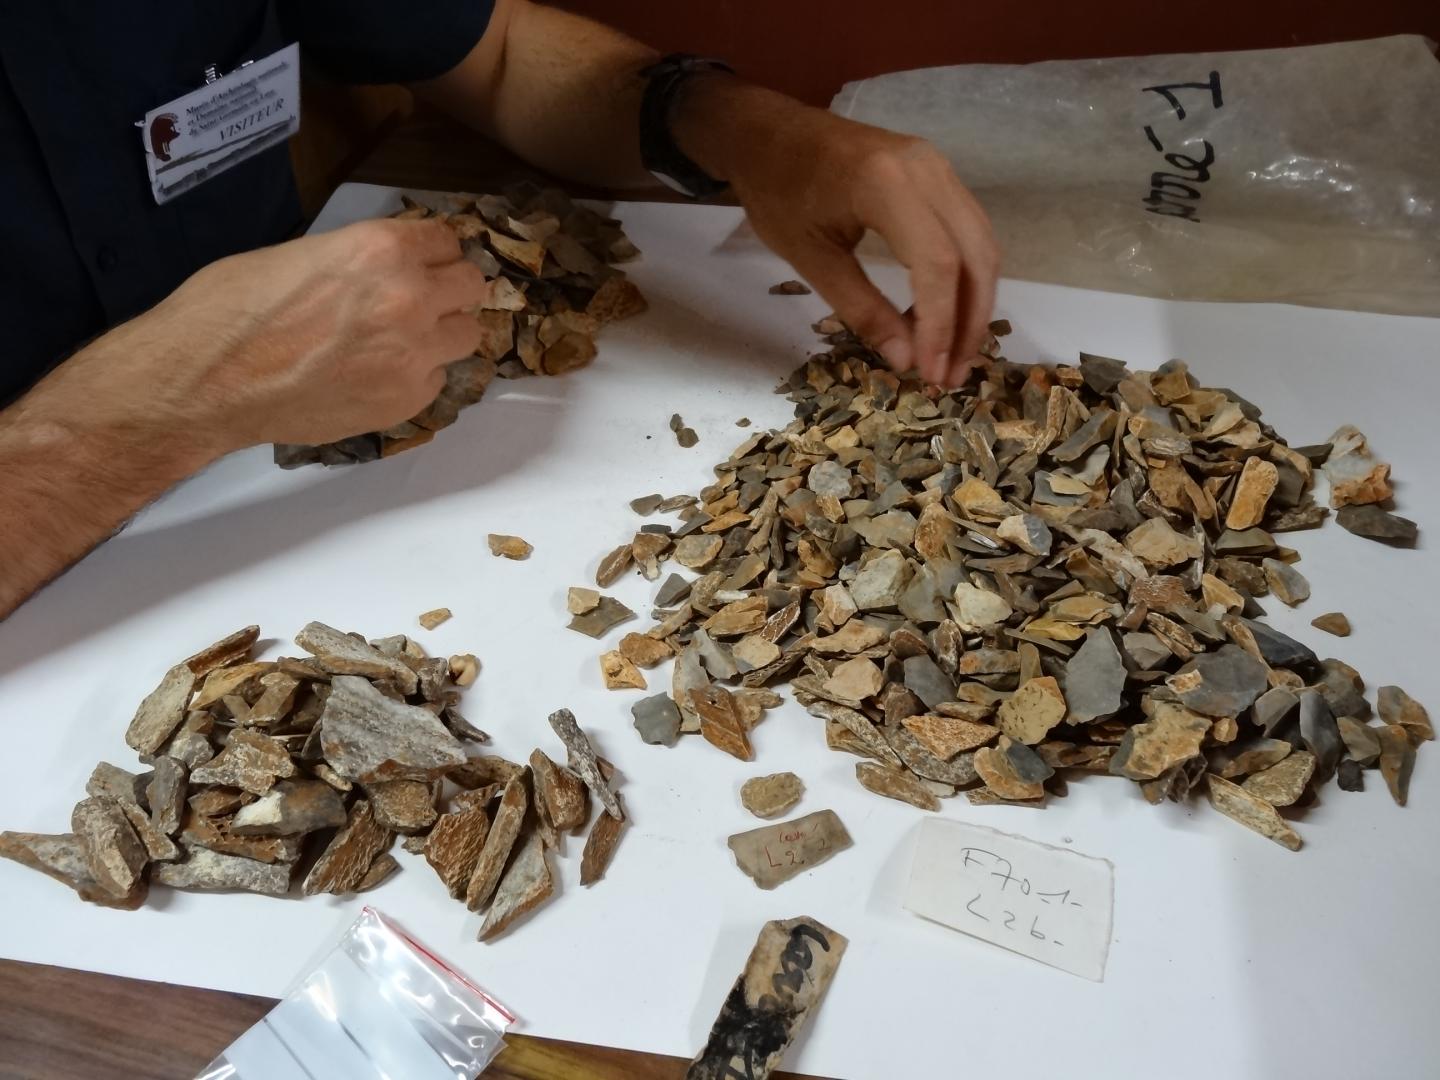 Examining material from the 1970s excavations